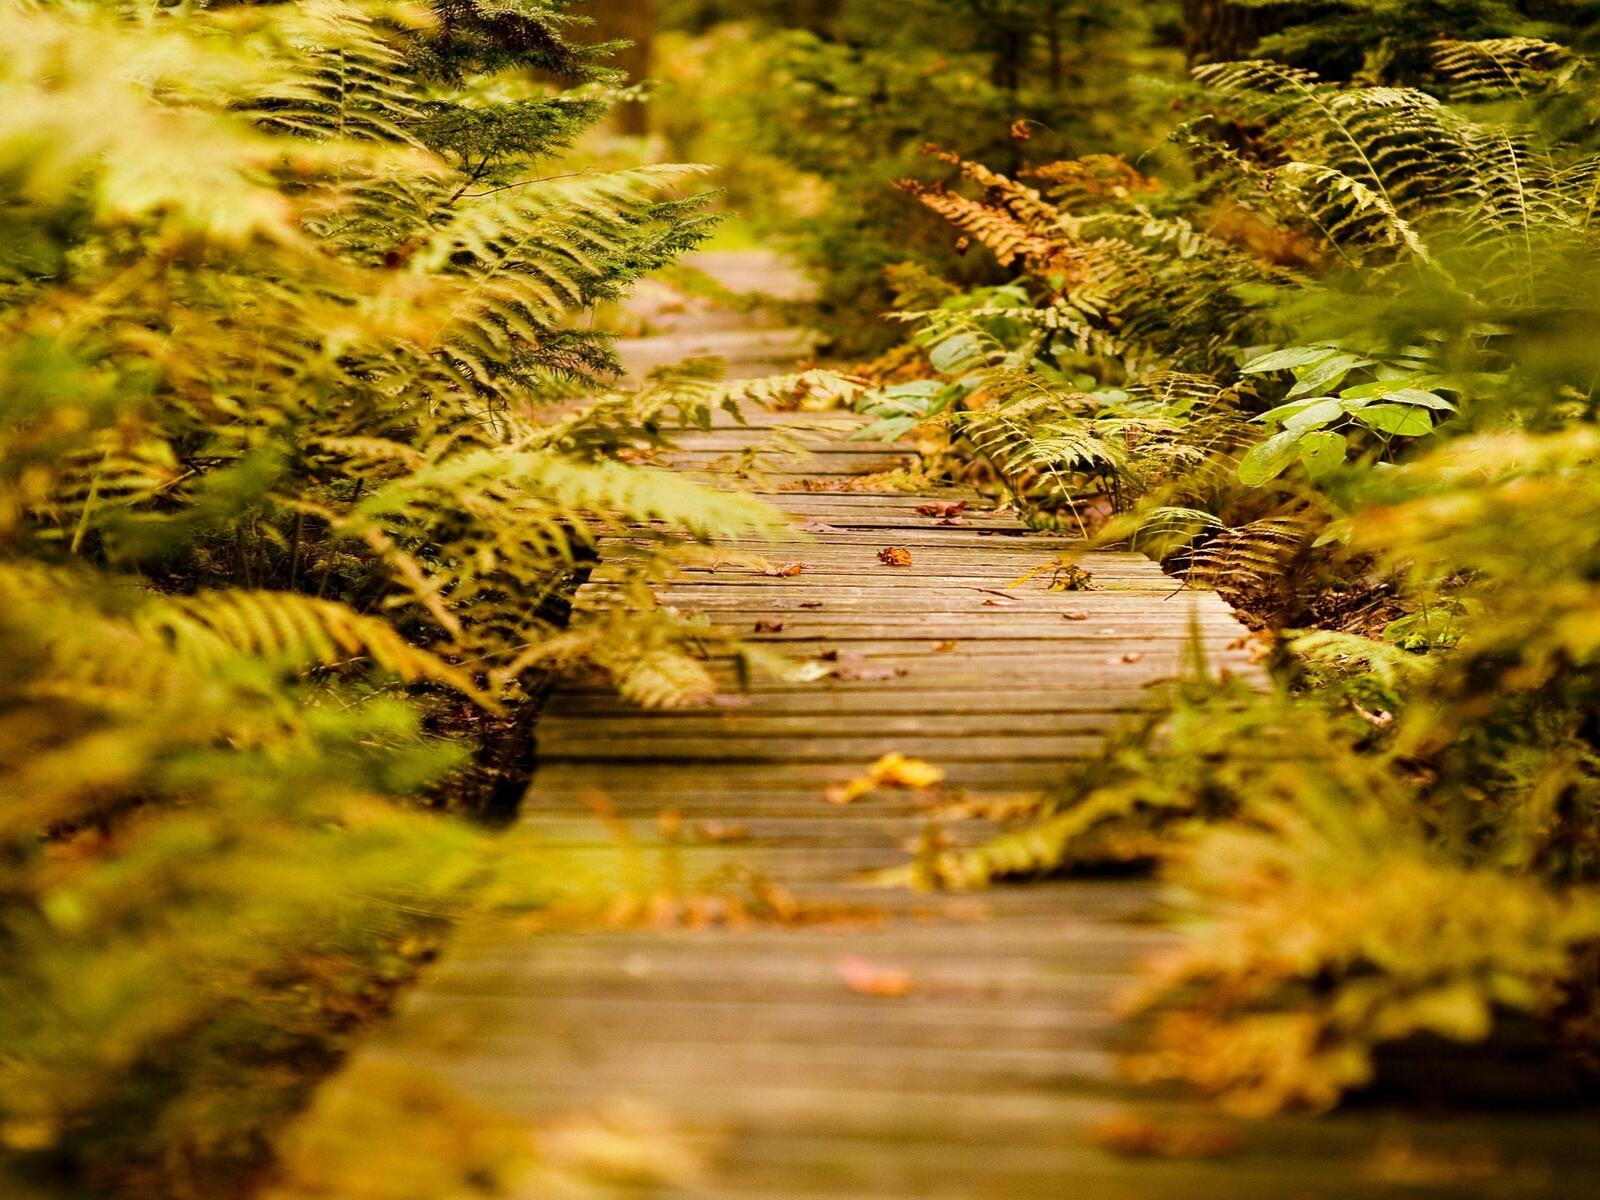 Free photo A fern grows by the wooden pathway